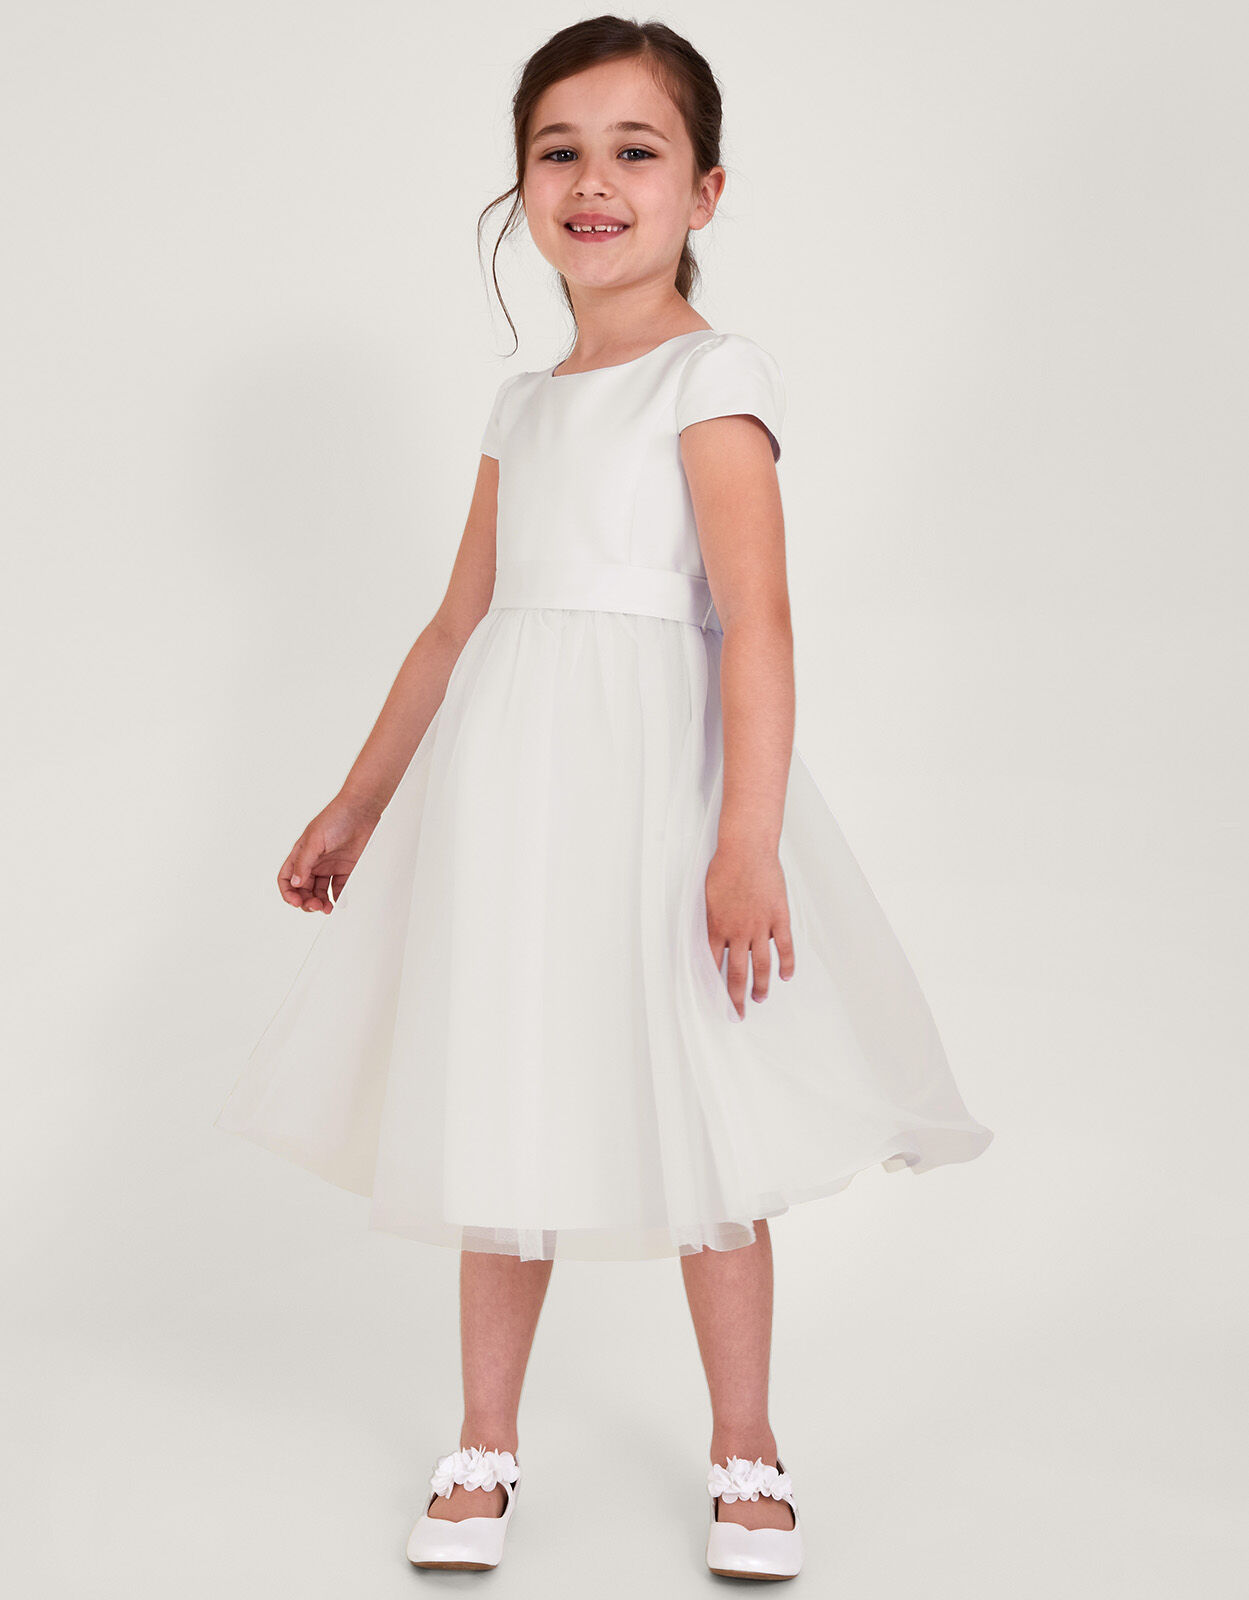 Dresses & Frocks for Girls - Buy Girls Dresses & Frocks online for best  prices in India - AJIO